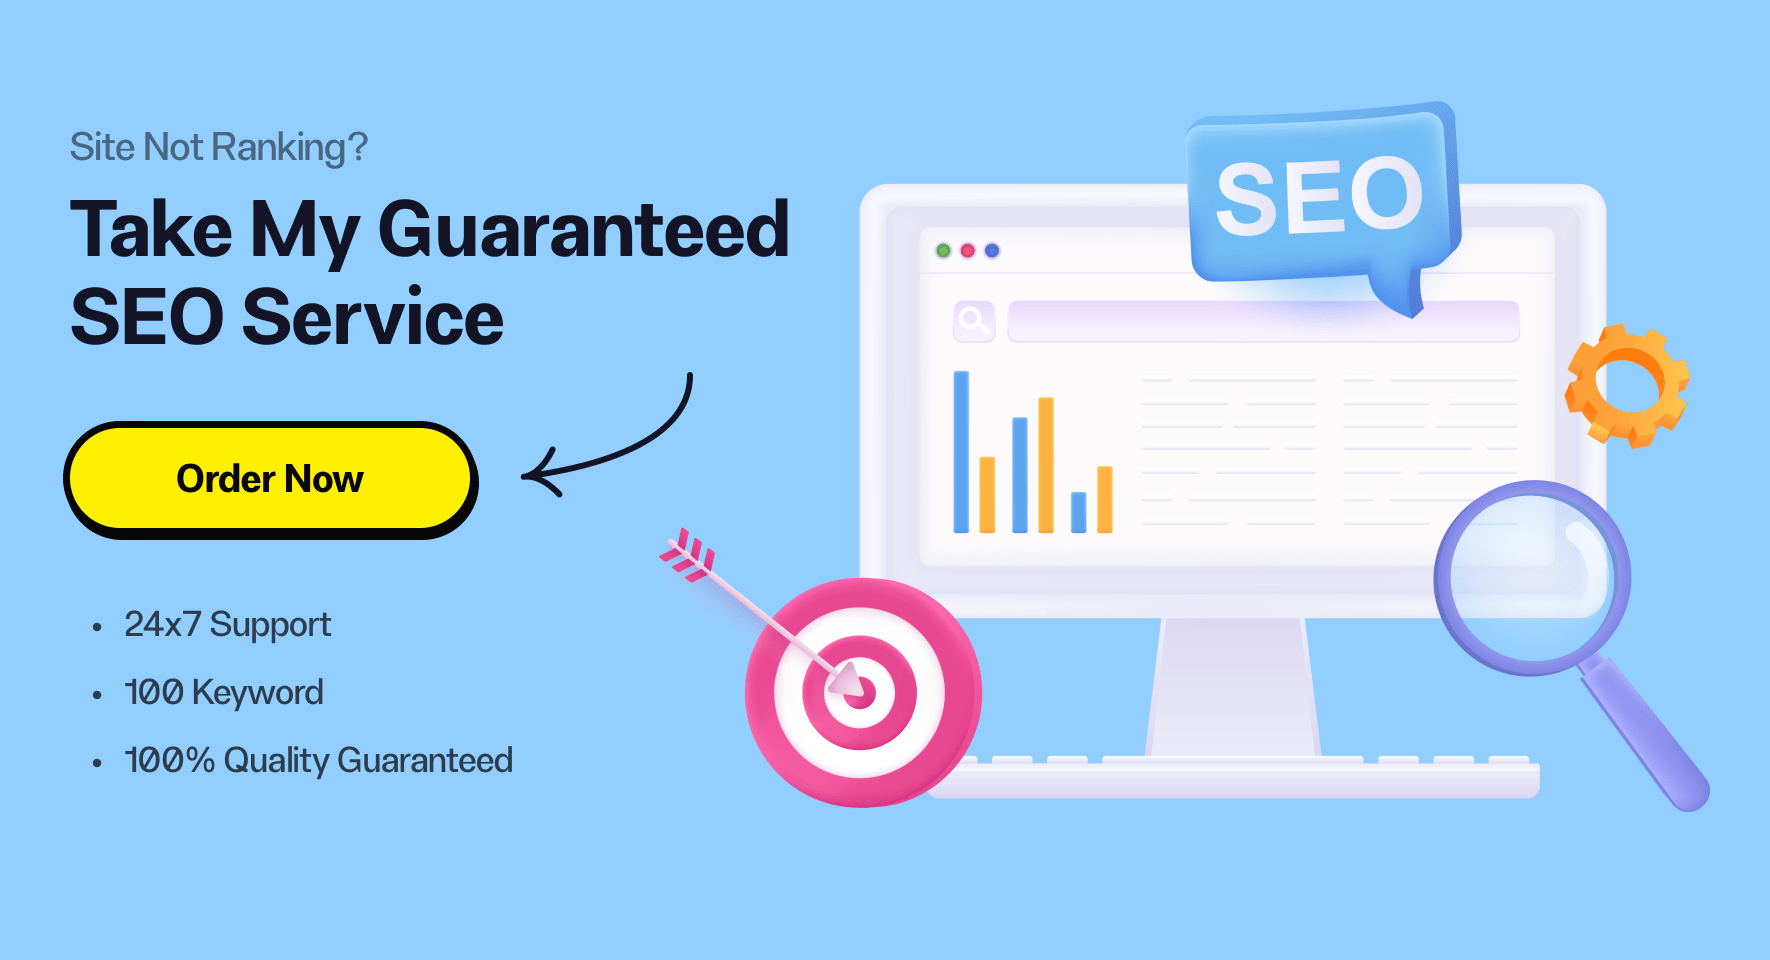 Your SEO Advantage: I will be your dedicated SEO website content writer